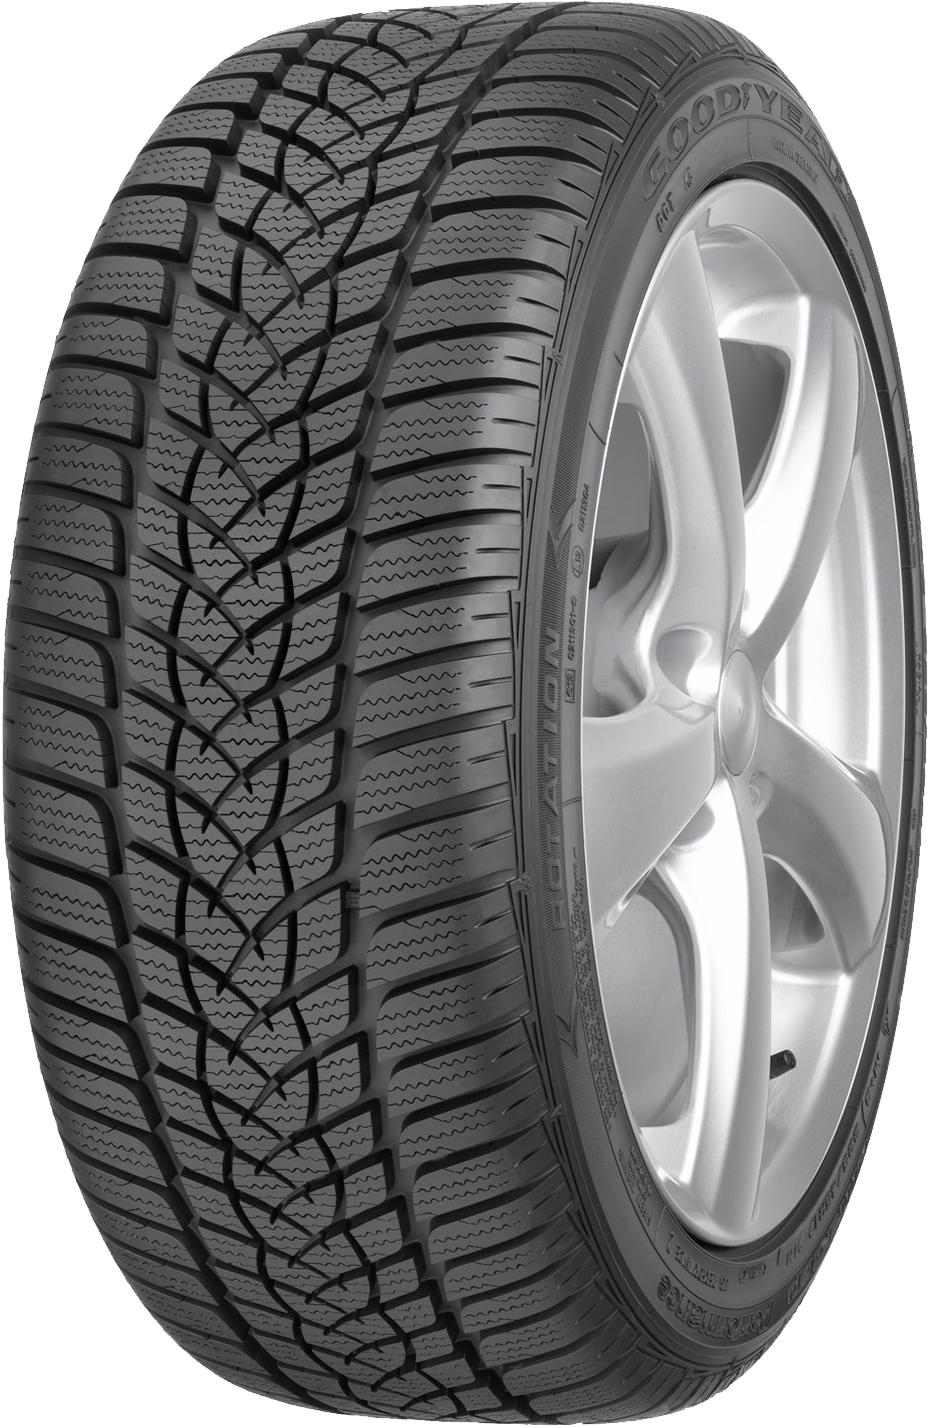 Anvelope auto GOODYEAR Ultra Grip Performance 2 XL FP 225/40 R18 92V